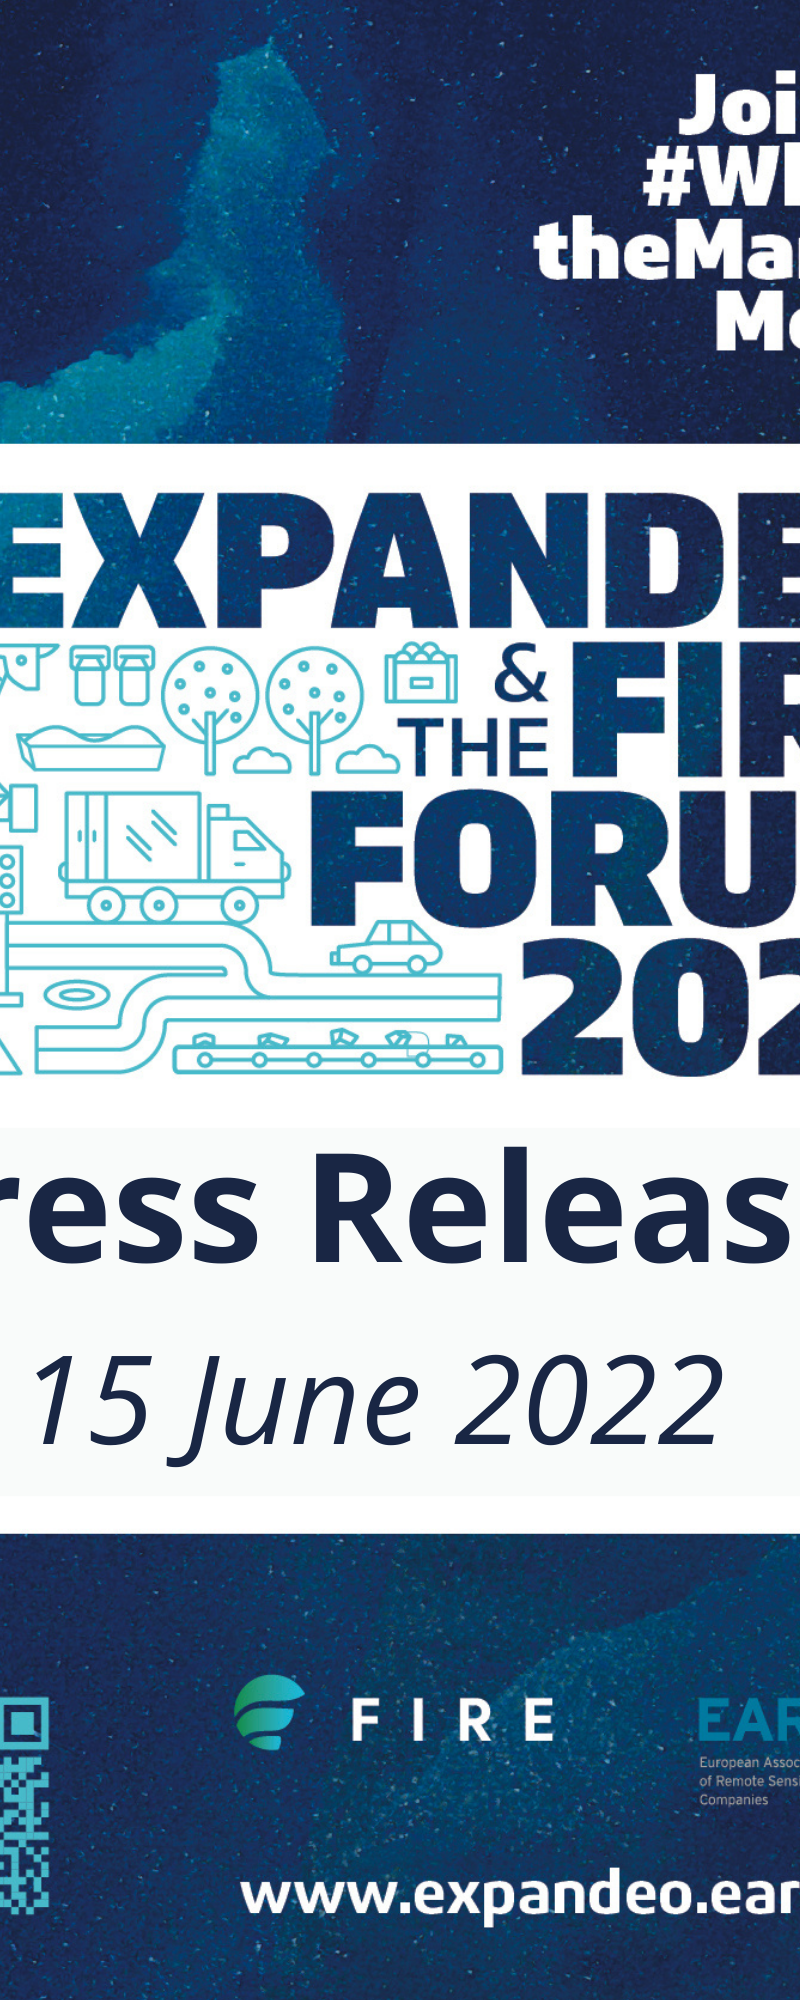 EXPANDEO & the FIRE Forum 2022 Press Release